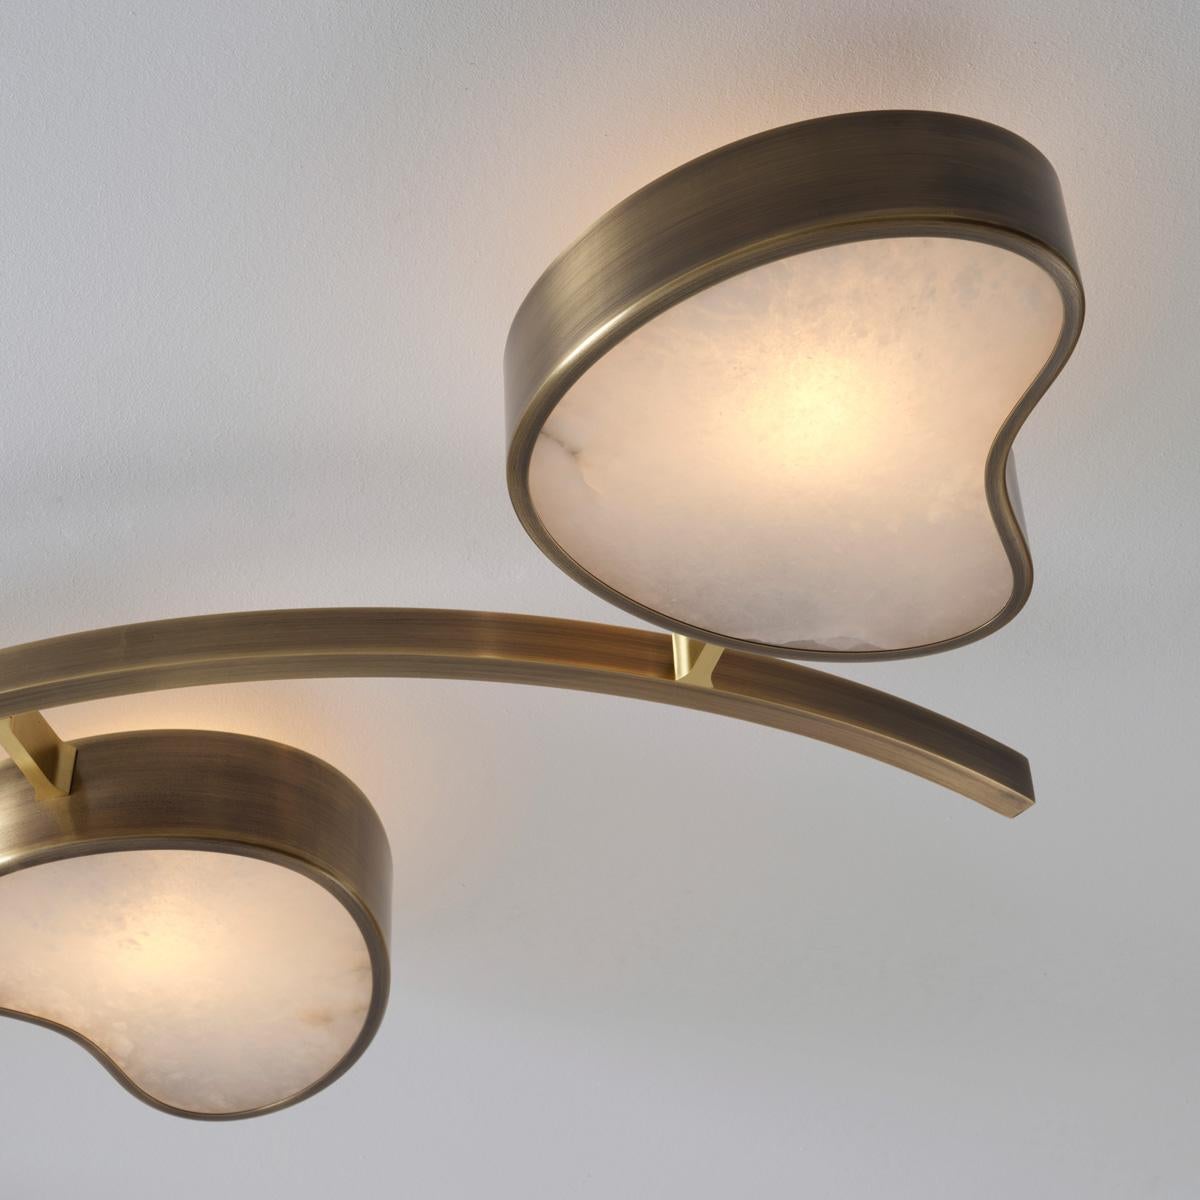 Cuore N.6 Ceiling Light by Gaspare Asaro. Polished Brass Finish For Sale 5